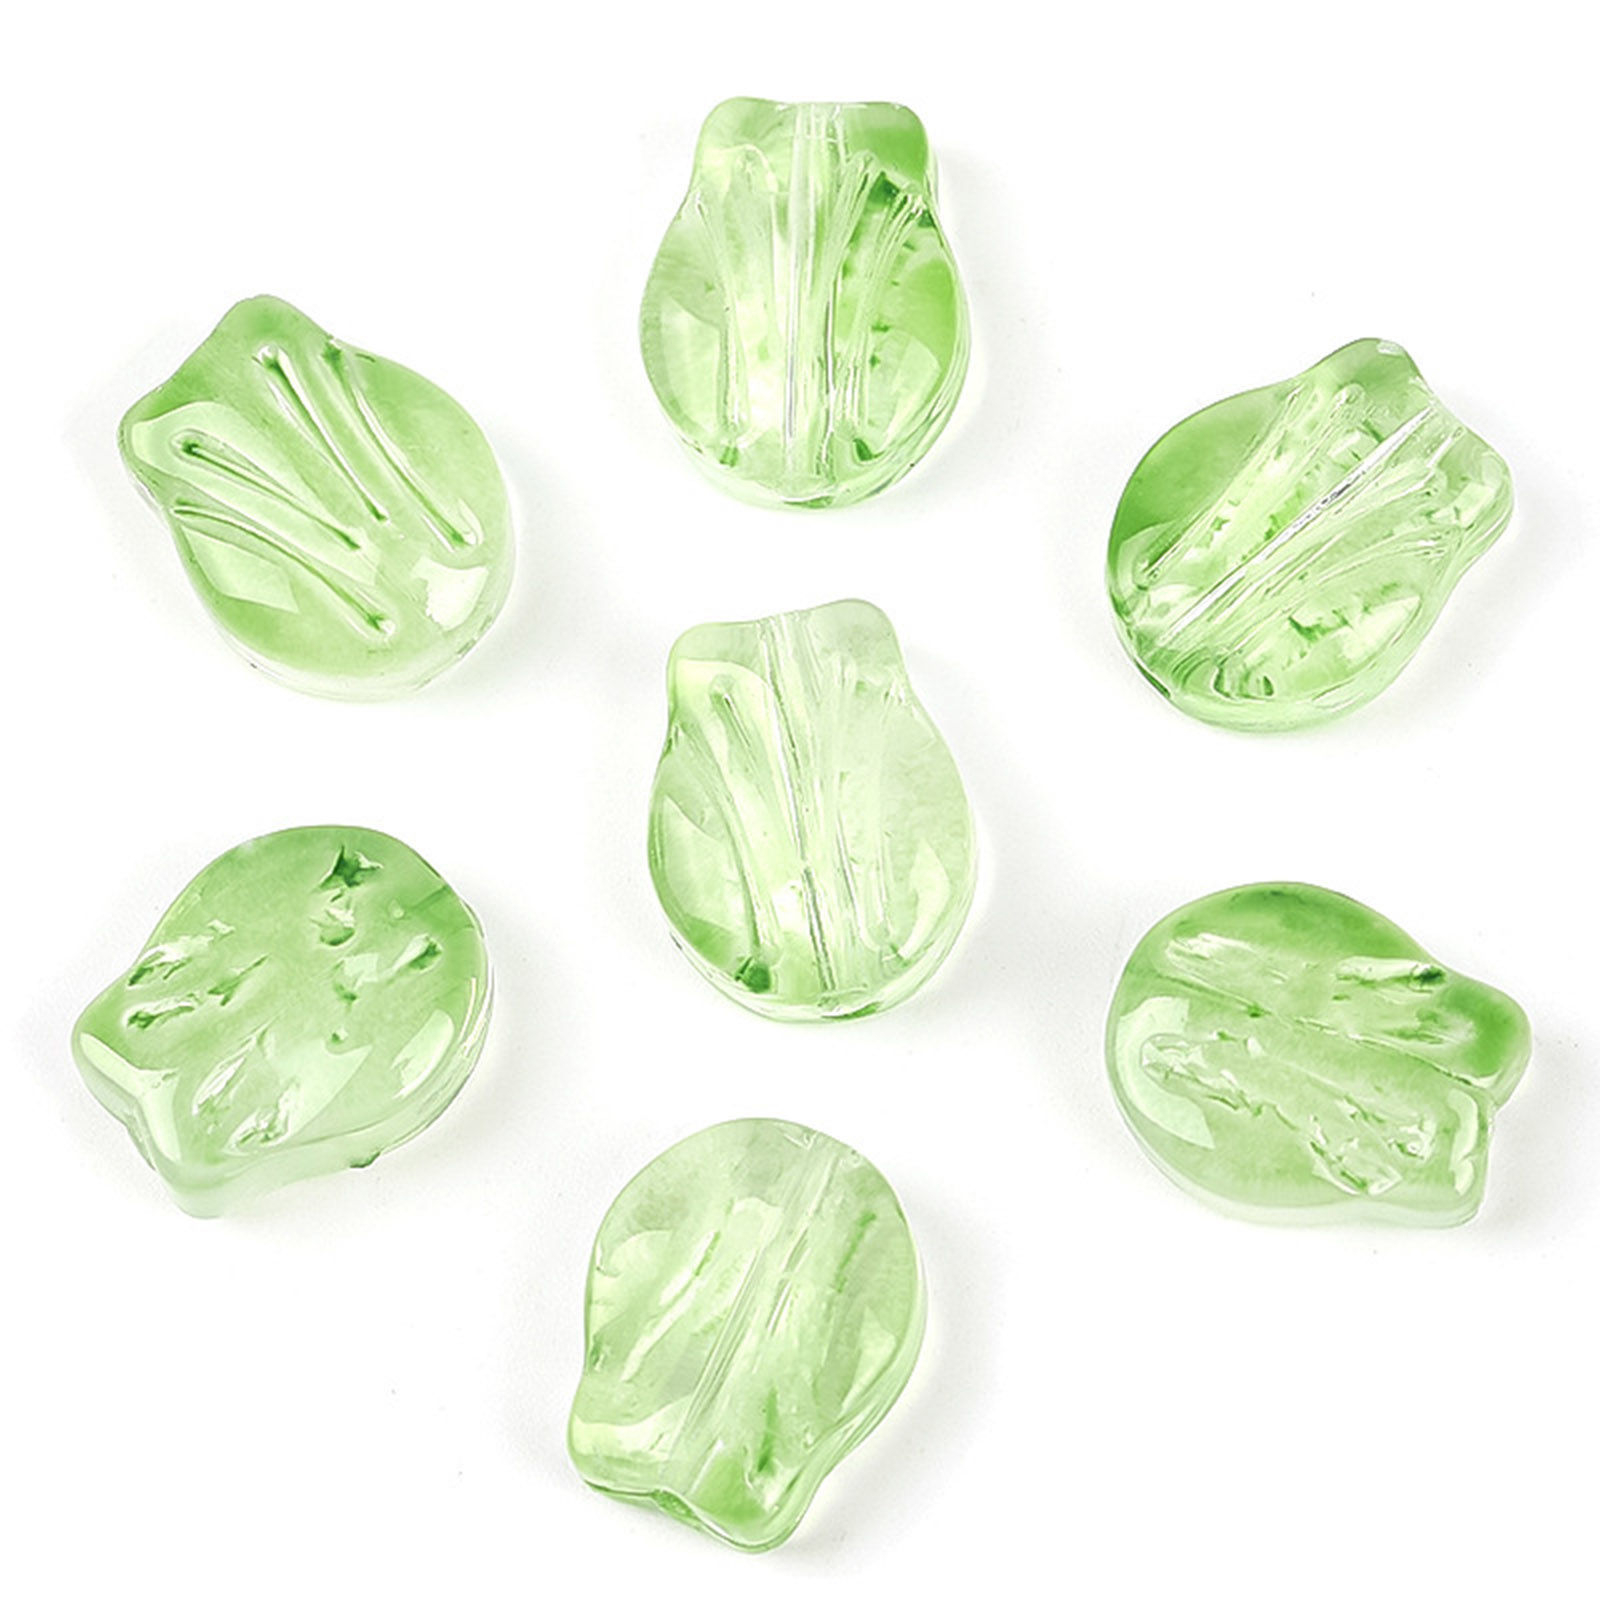 Picture of Lampwork Glass Beads Tulip Flower Green Gradient Color About 10.5mm x 8.4mm, Hole: Approx 0.8mm, 20 PCs